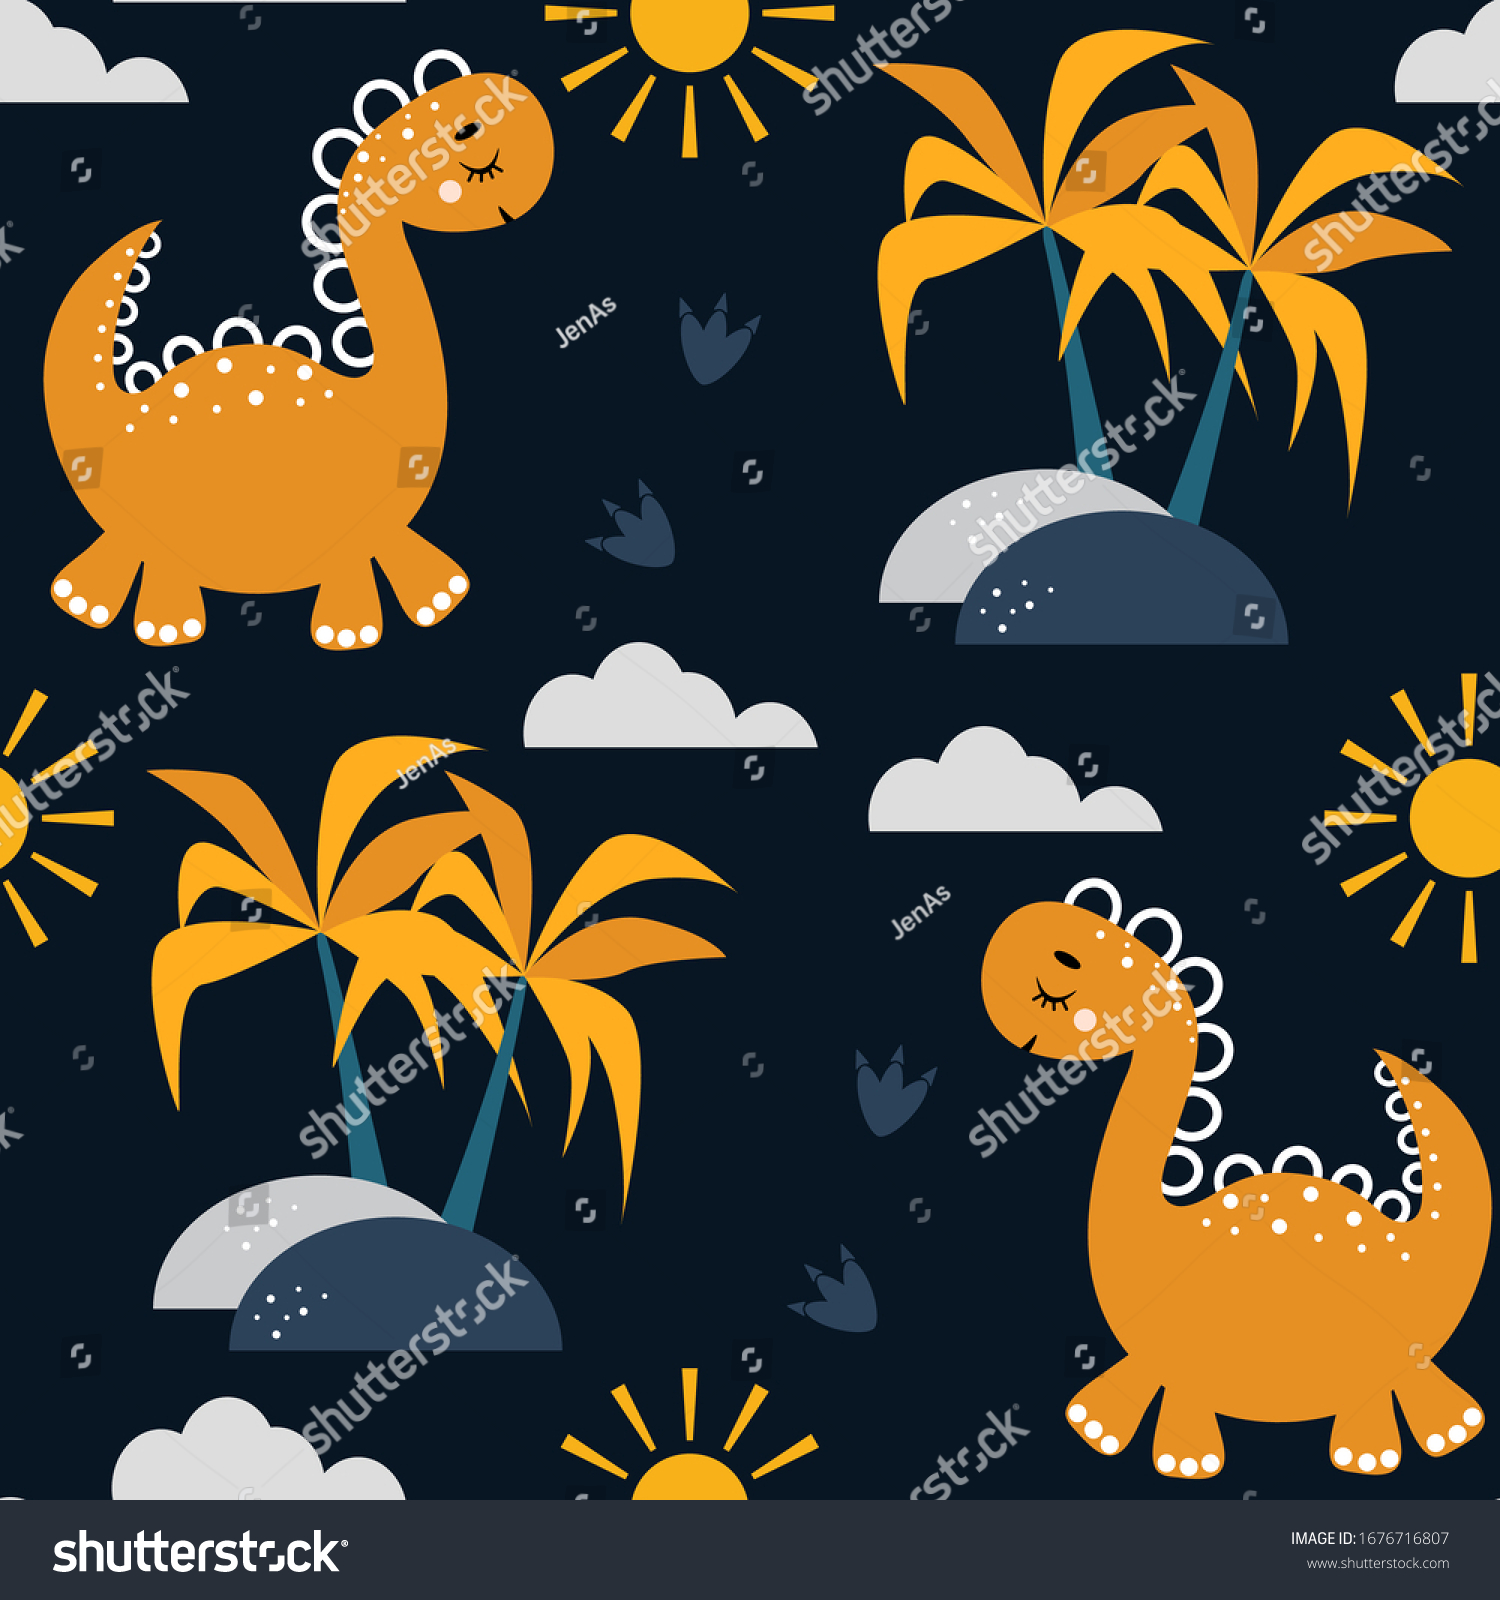 Colorful Seamless Pattern Cute Yellow Dinosaurs Stock Vector Royalty Free 1676716807 Orange dinosaur on yellow background. shutterstock